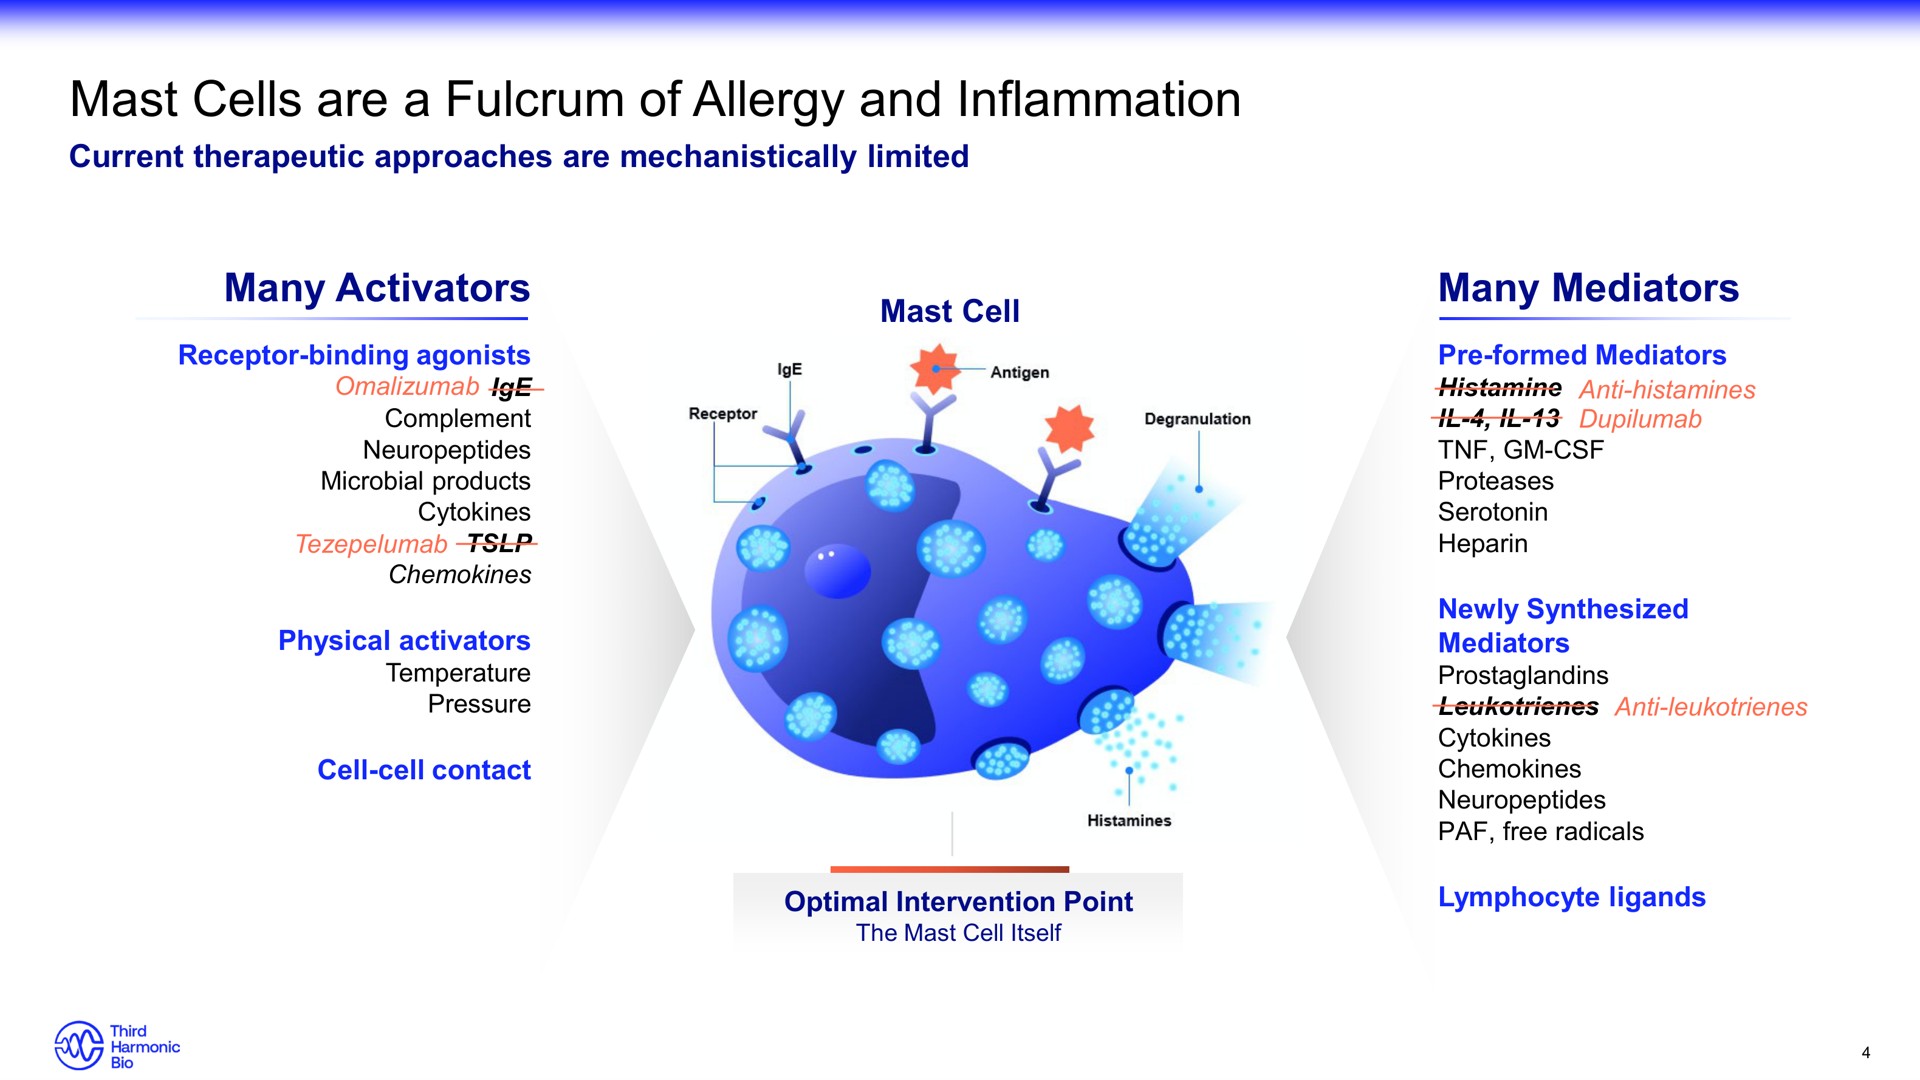 mast cells are a fulcrum of allergy and inflammation | Third Harmonic Bio